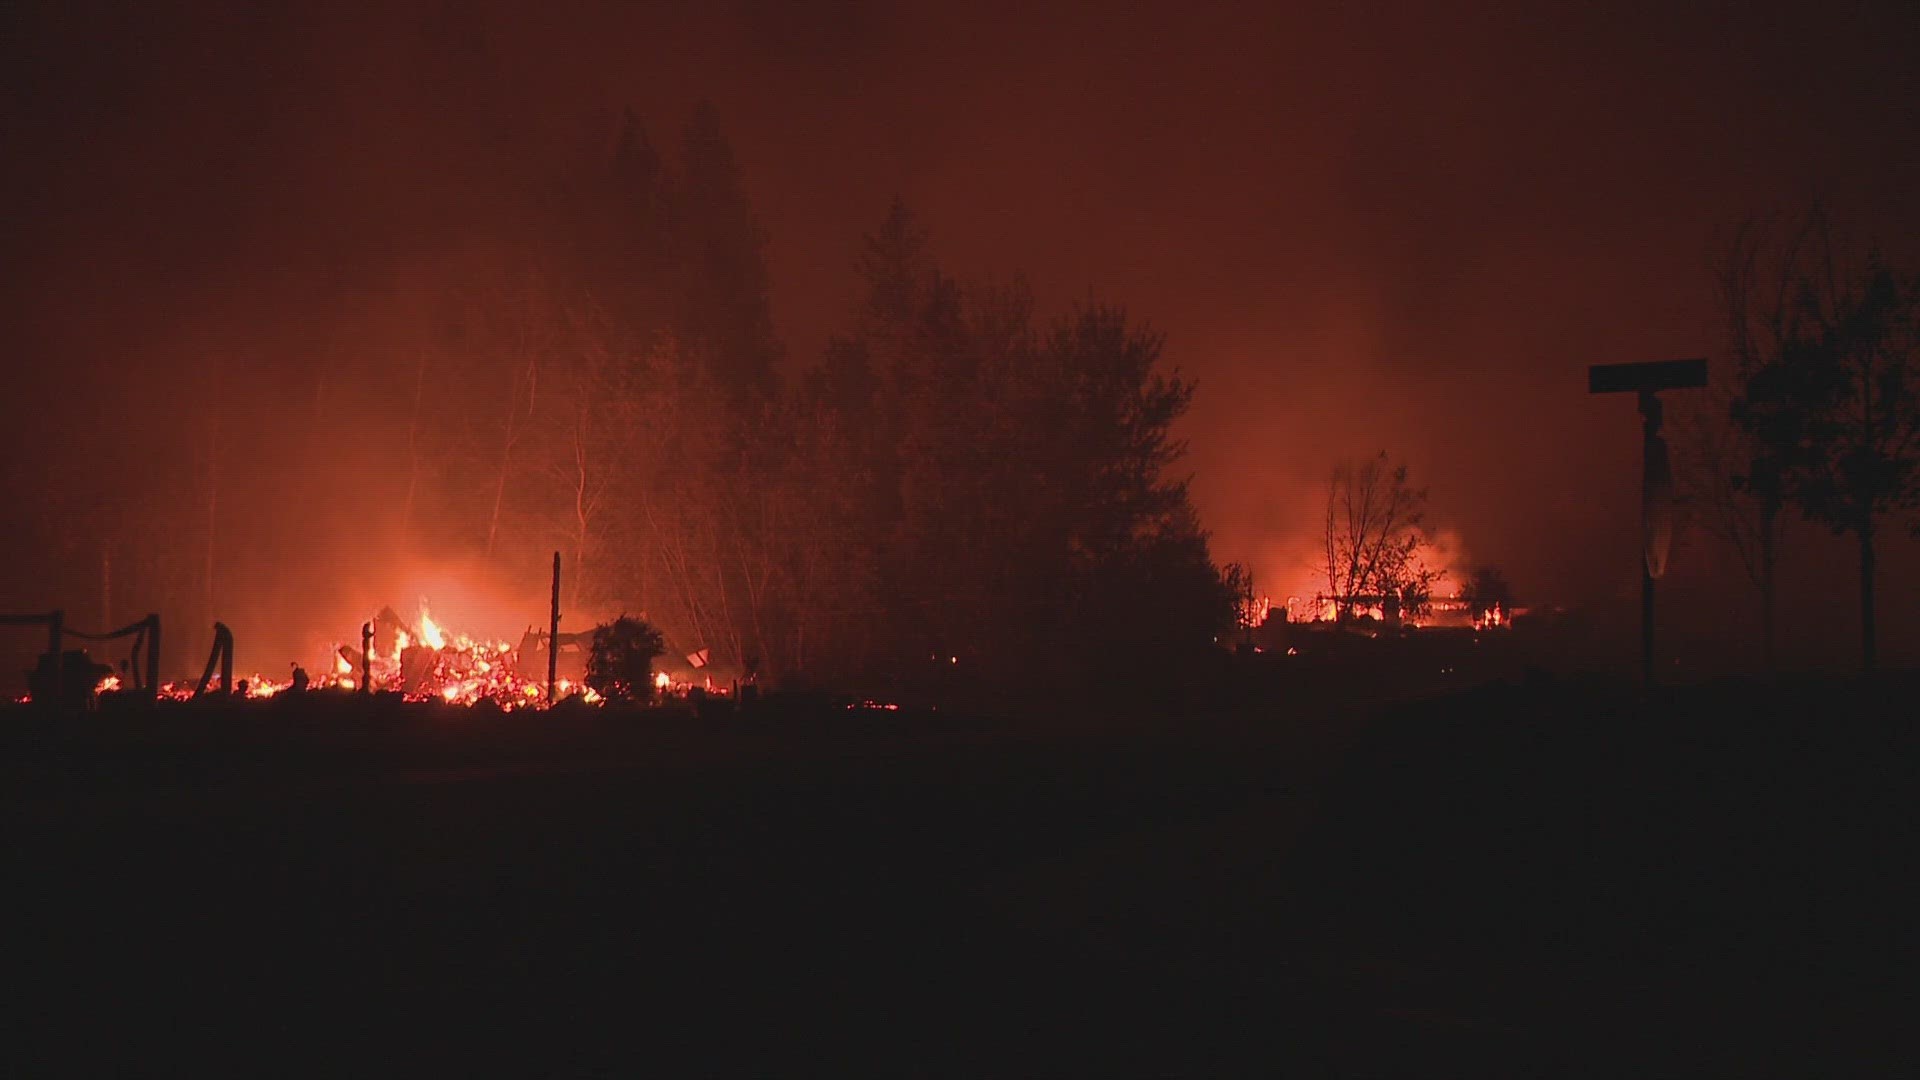 Two new lawsuits have been filed, placing Inland Power & Light at fault for the Gray fire that burned over 11,000 acres and destroyed over 240 structures.